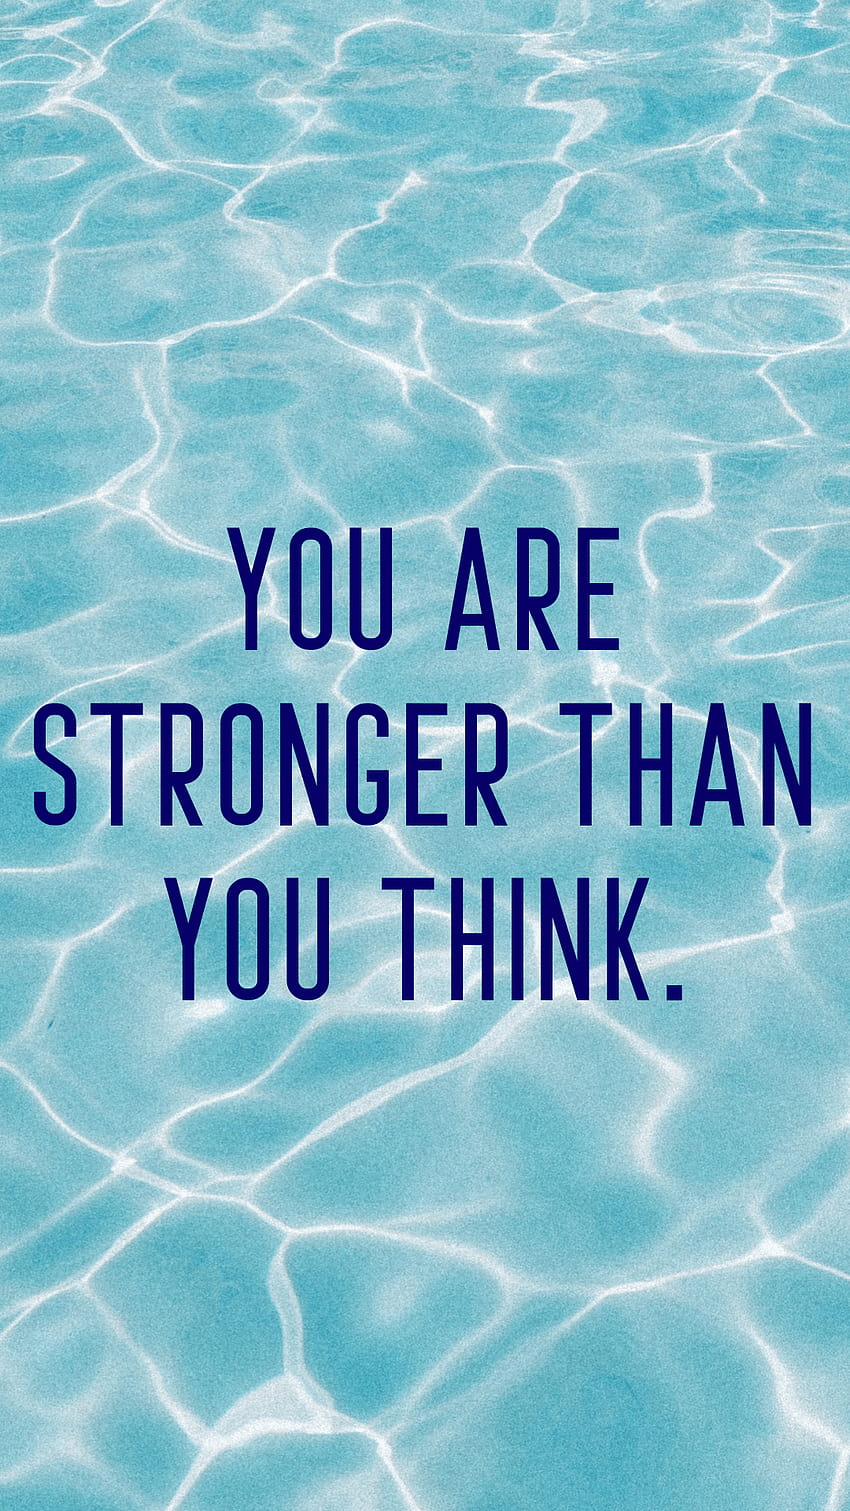 Inspirational and Motivational Quotes + Phone Backgrounds, swimming quotes HD phone wallpaper